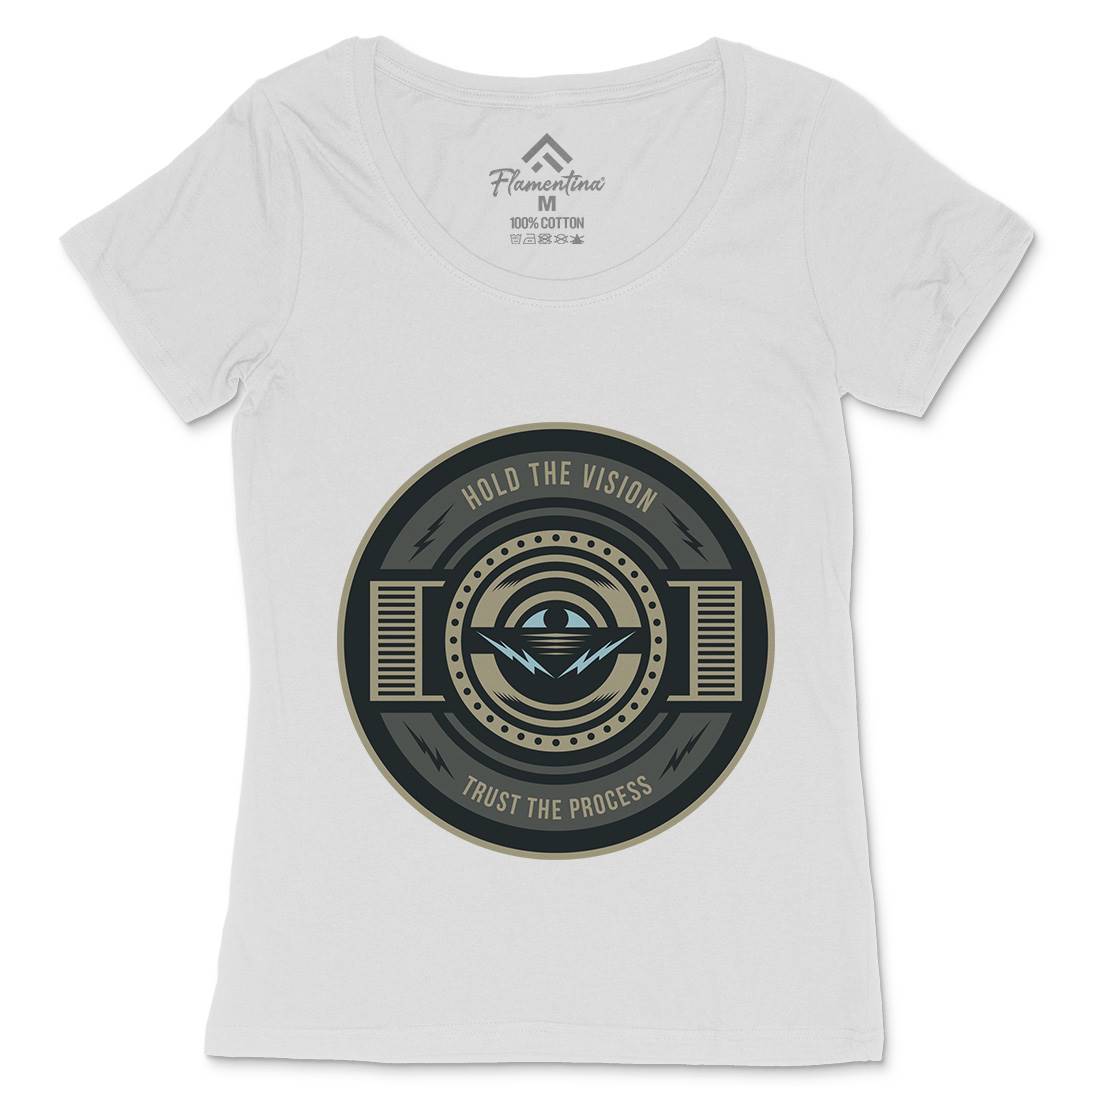 Hold The Vision Womens Scoop Neck T-Shirt Illuminati A331